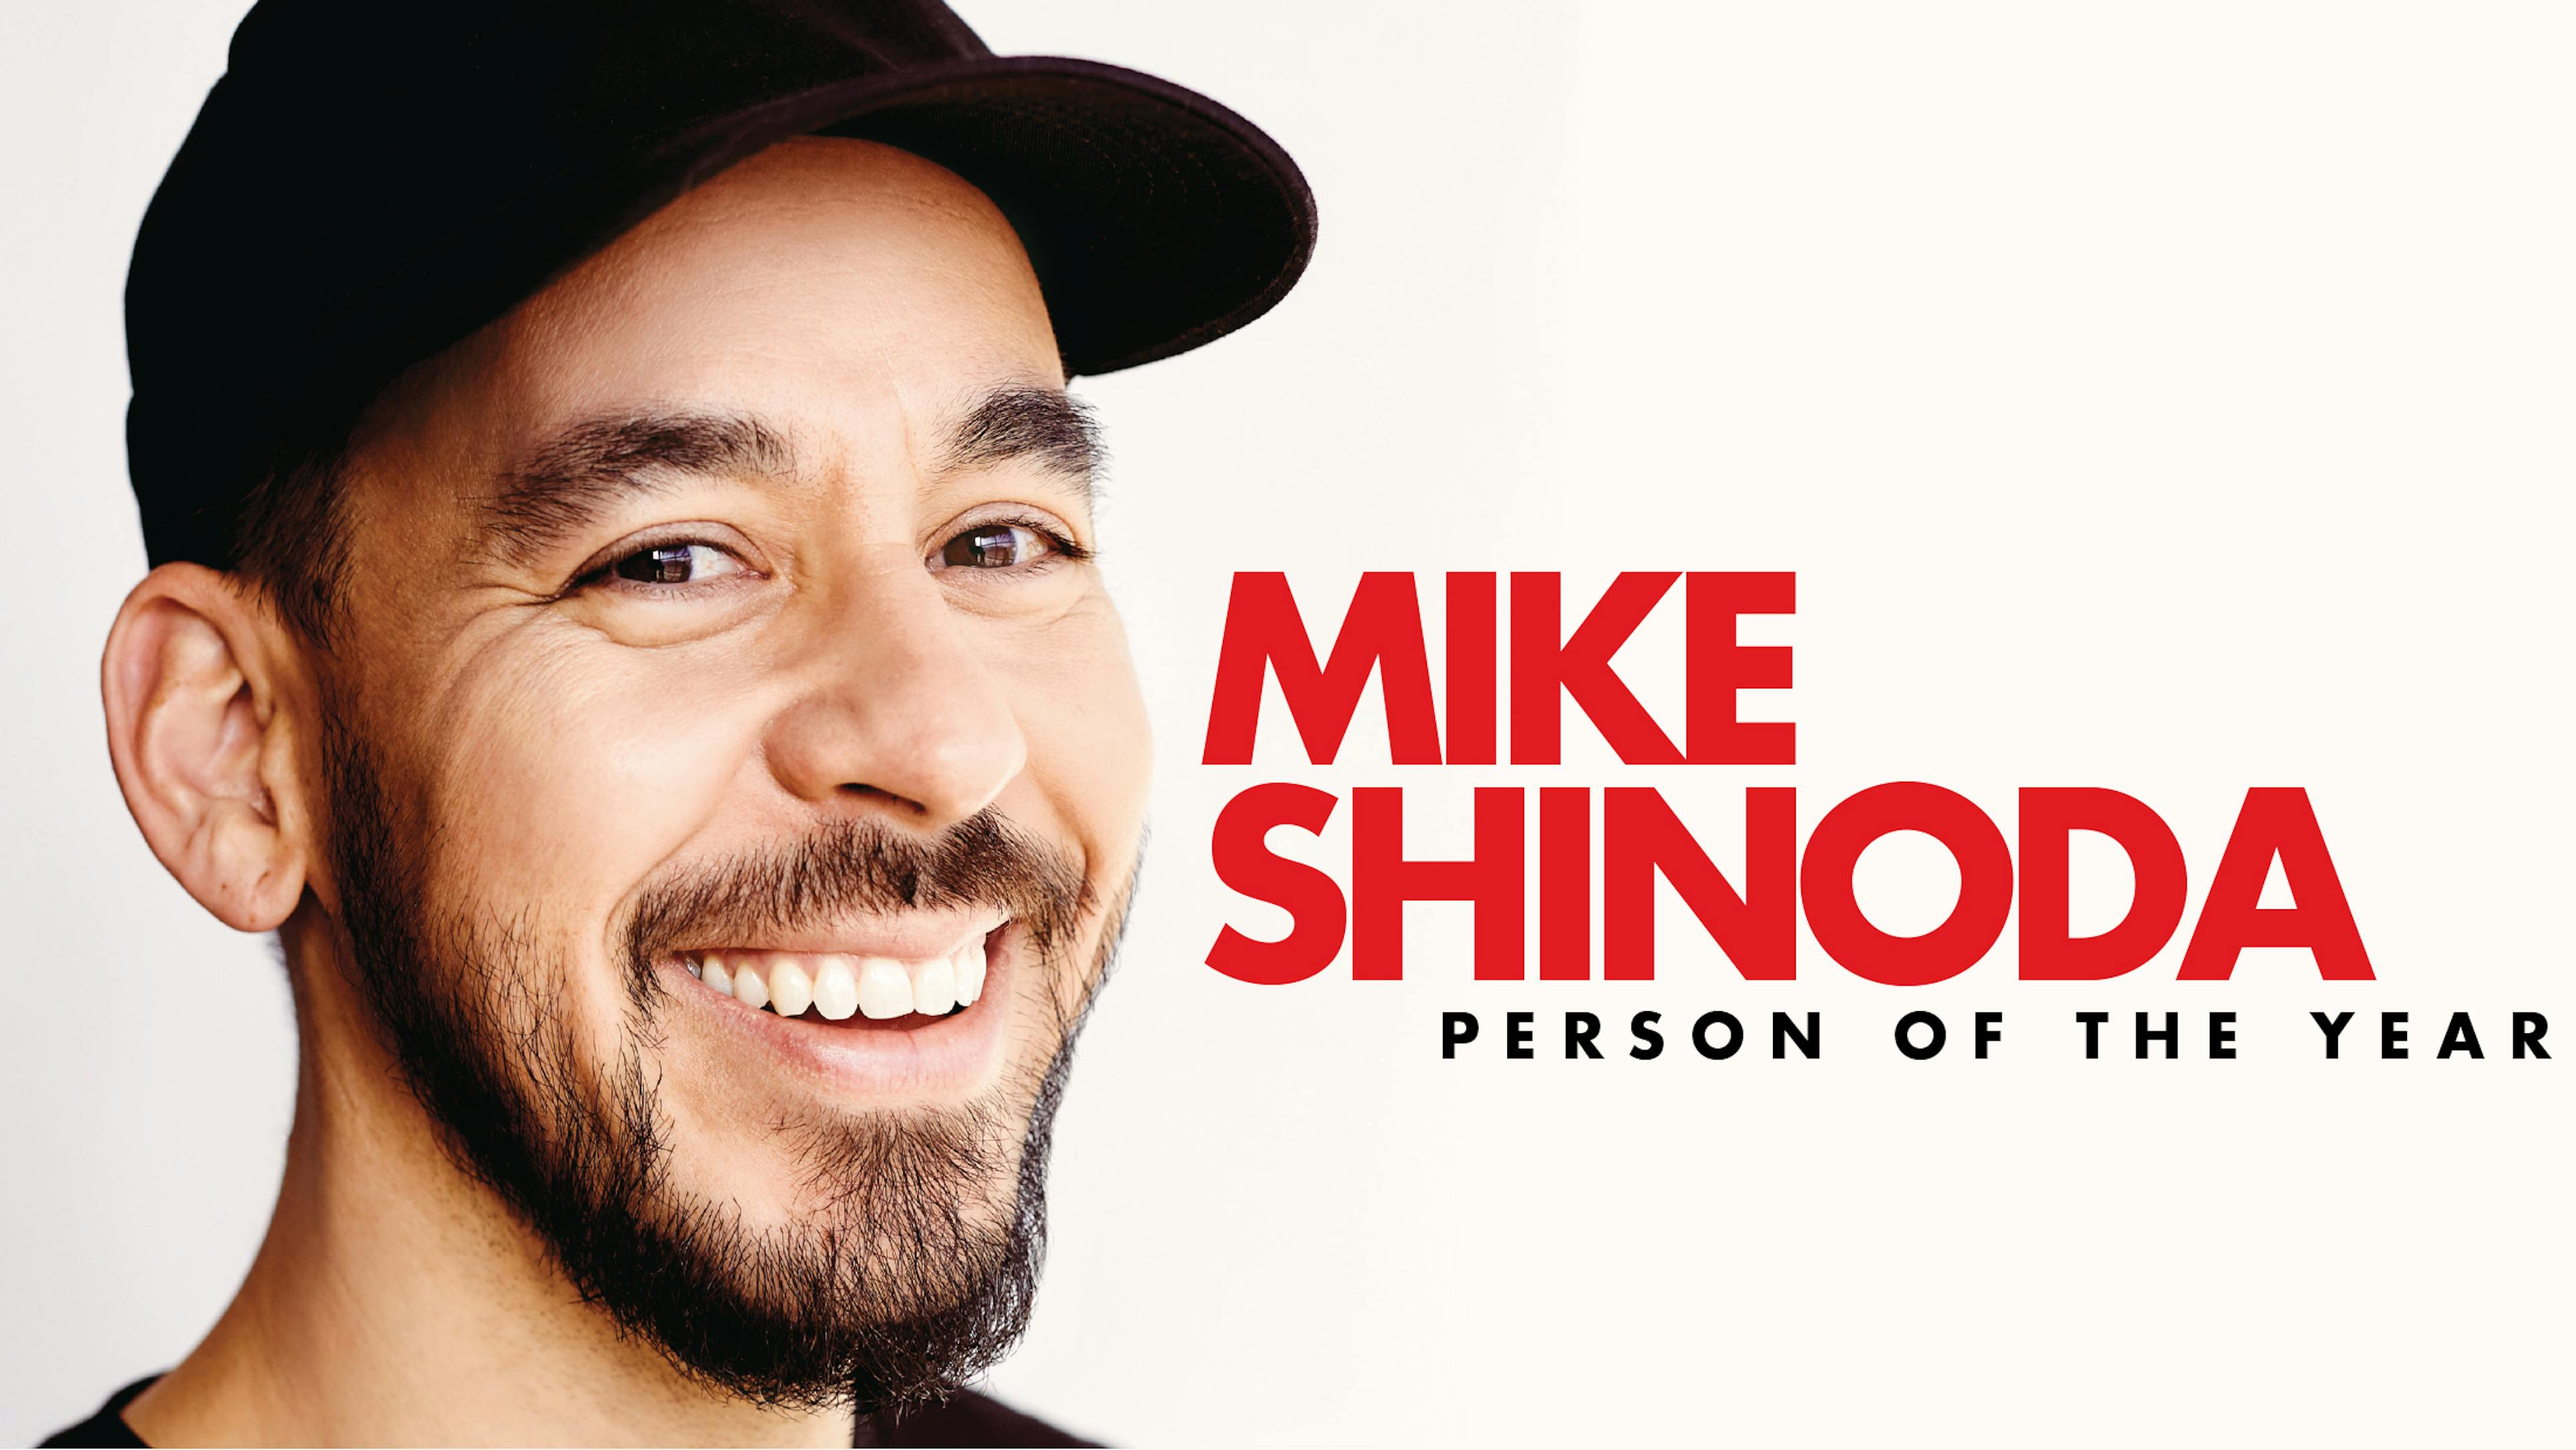 Get Exclusive Early Access To Tickets For Mike Shinoda's London Headline Gig